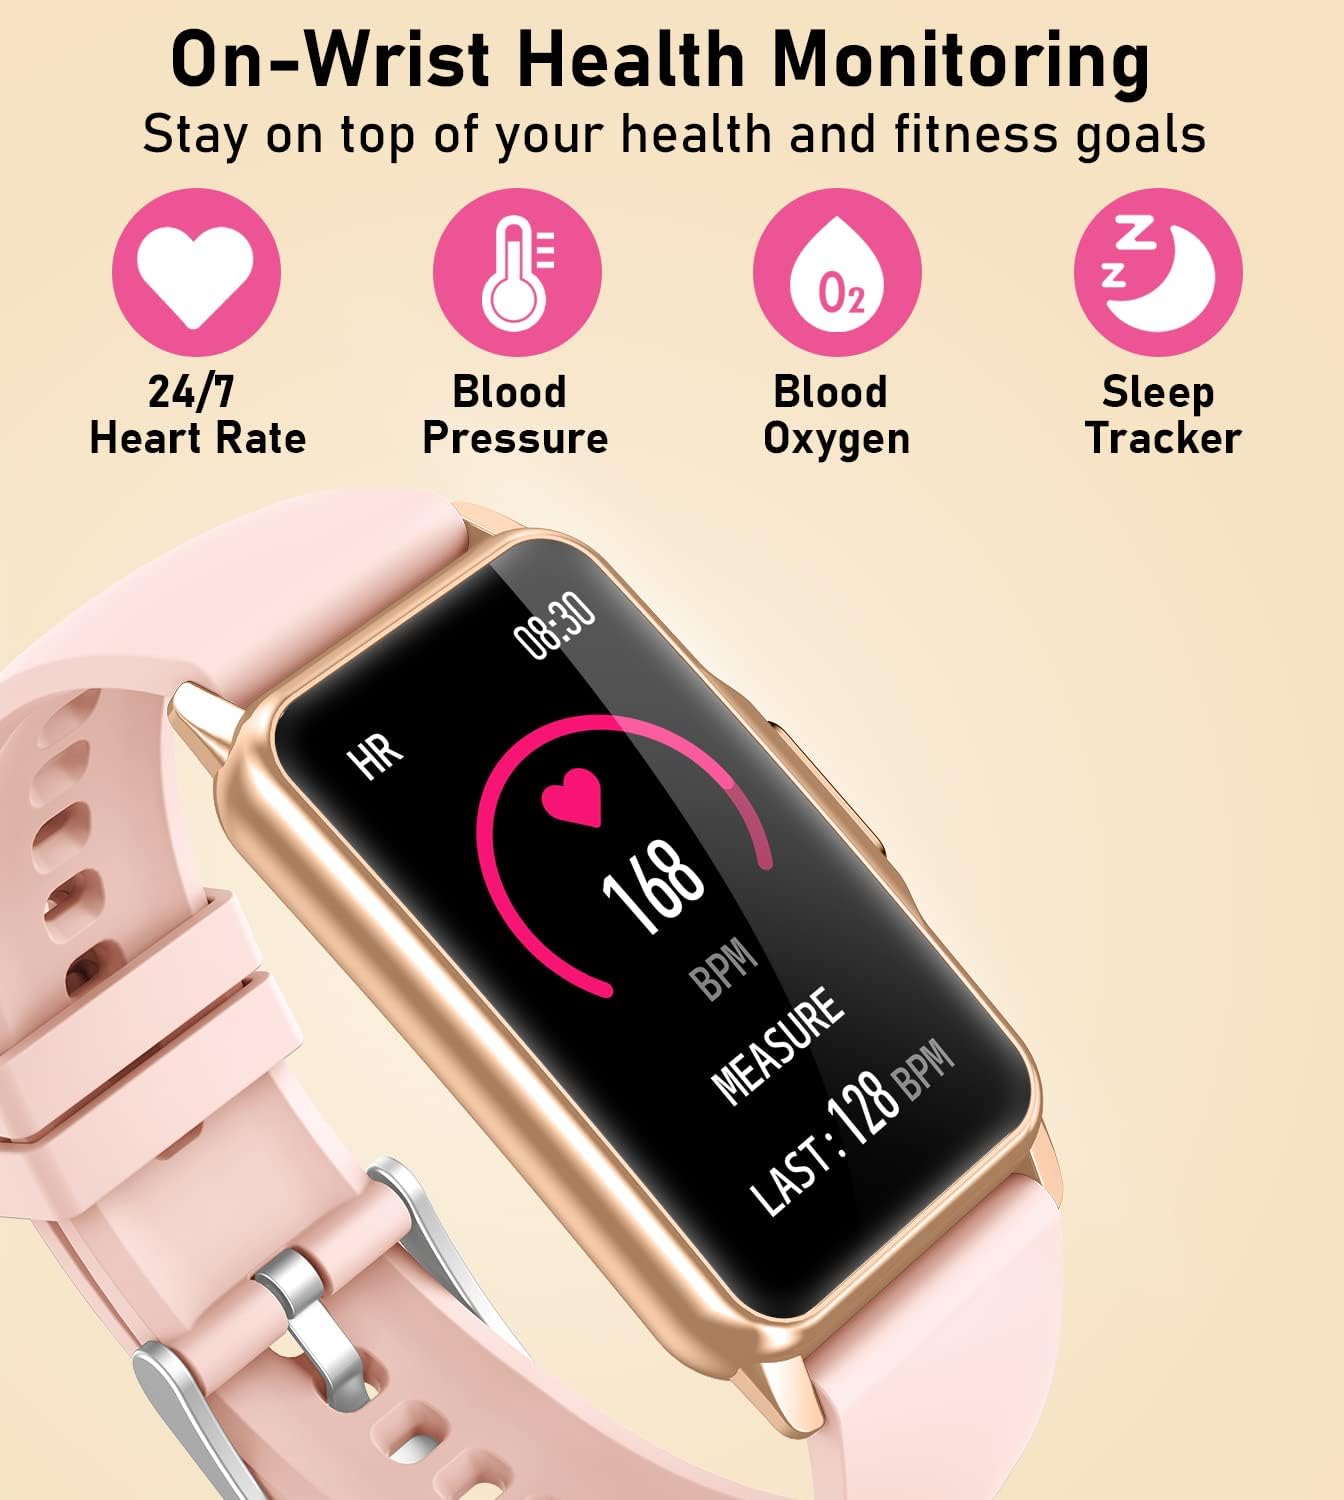 Smart Watch Fitness Tracker with Heart Rate Blood Oxygen Blood Pressure Sleep Monitor 100 Sports Modes Step Calorie Counter Action Health Trackers IP68 Waterproof for Android Phones iPhone Women Men